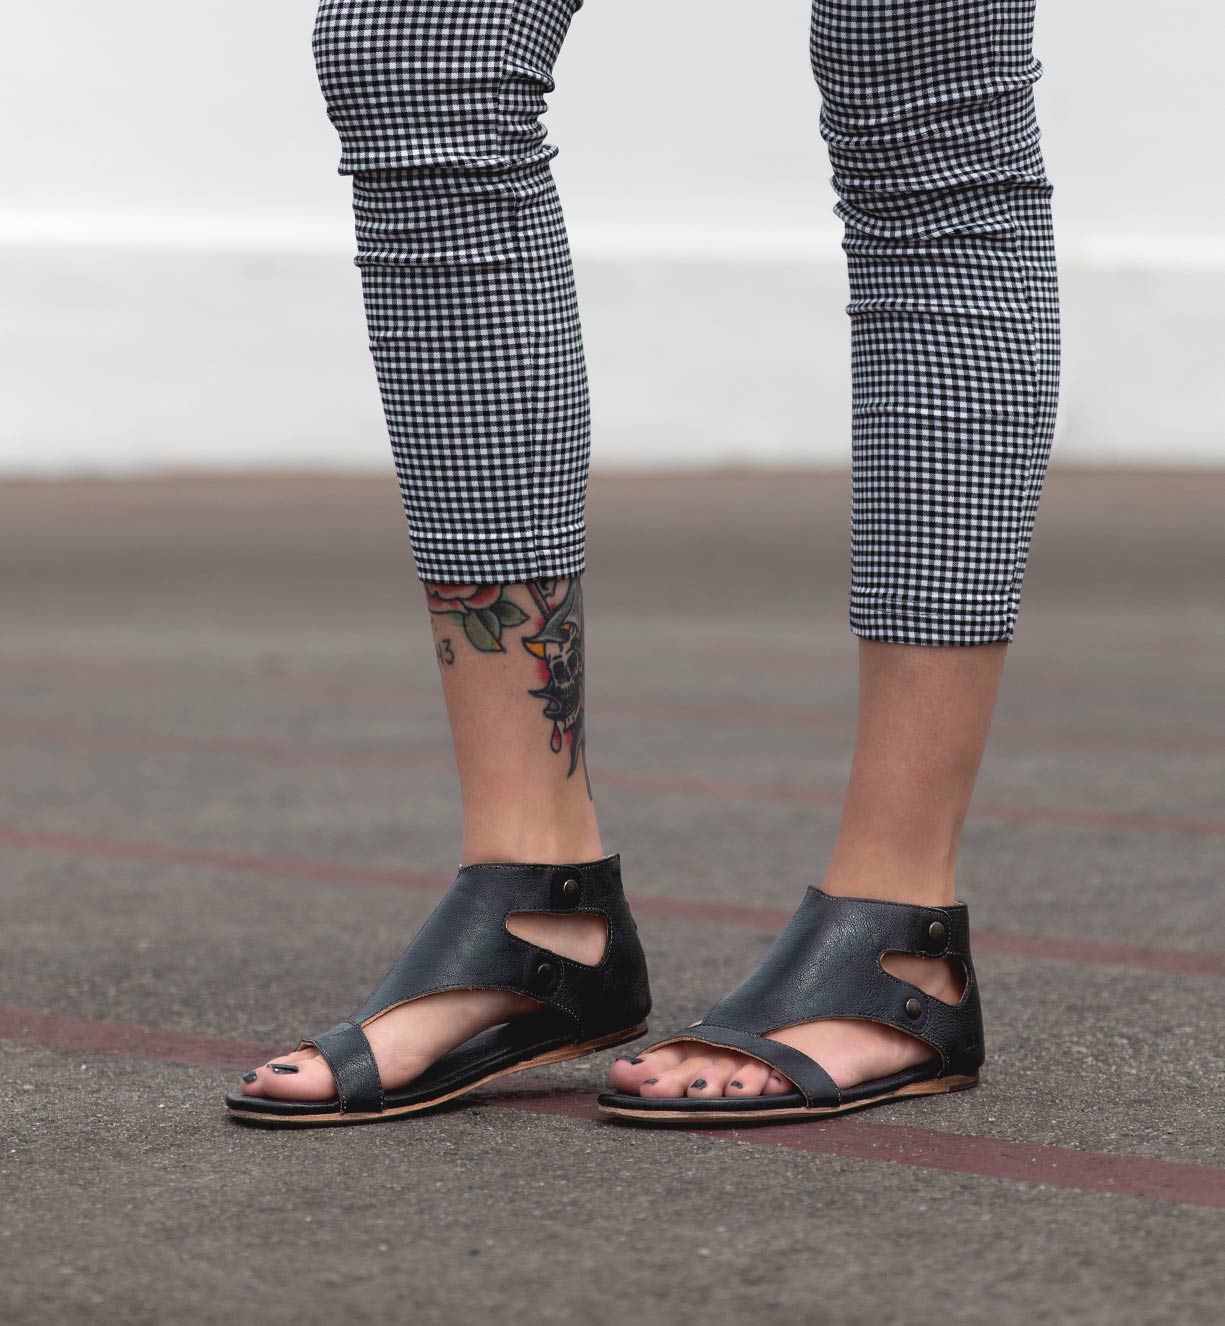 A woman wearing Bed Stu Soto leather sandals and plaid pants.